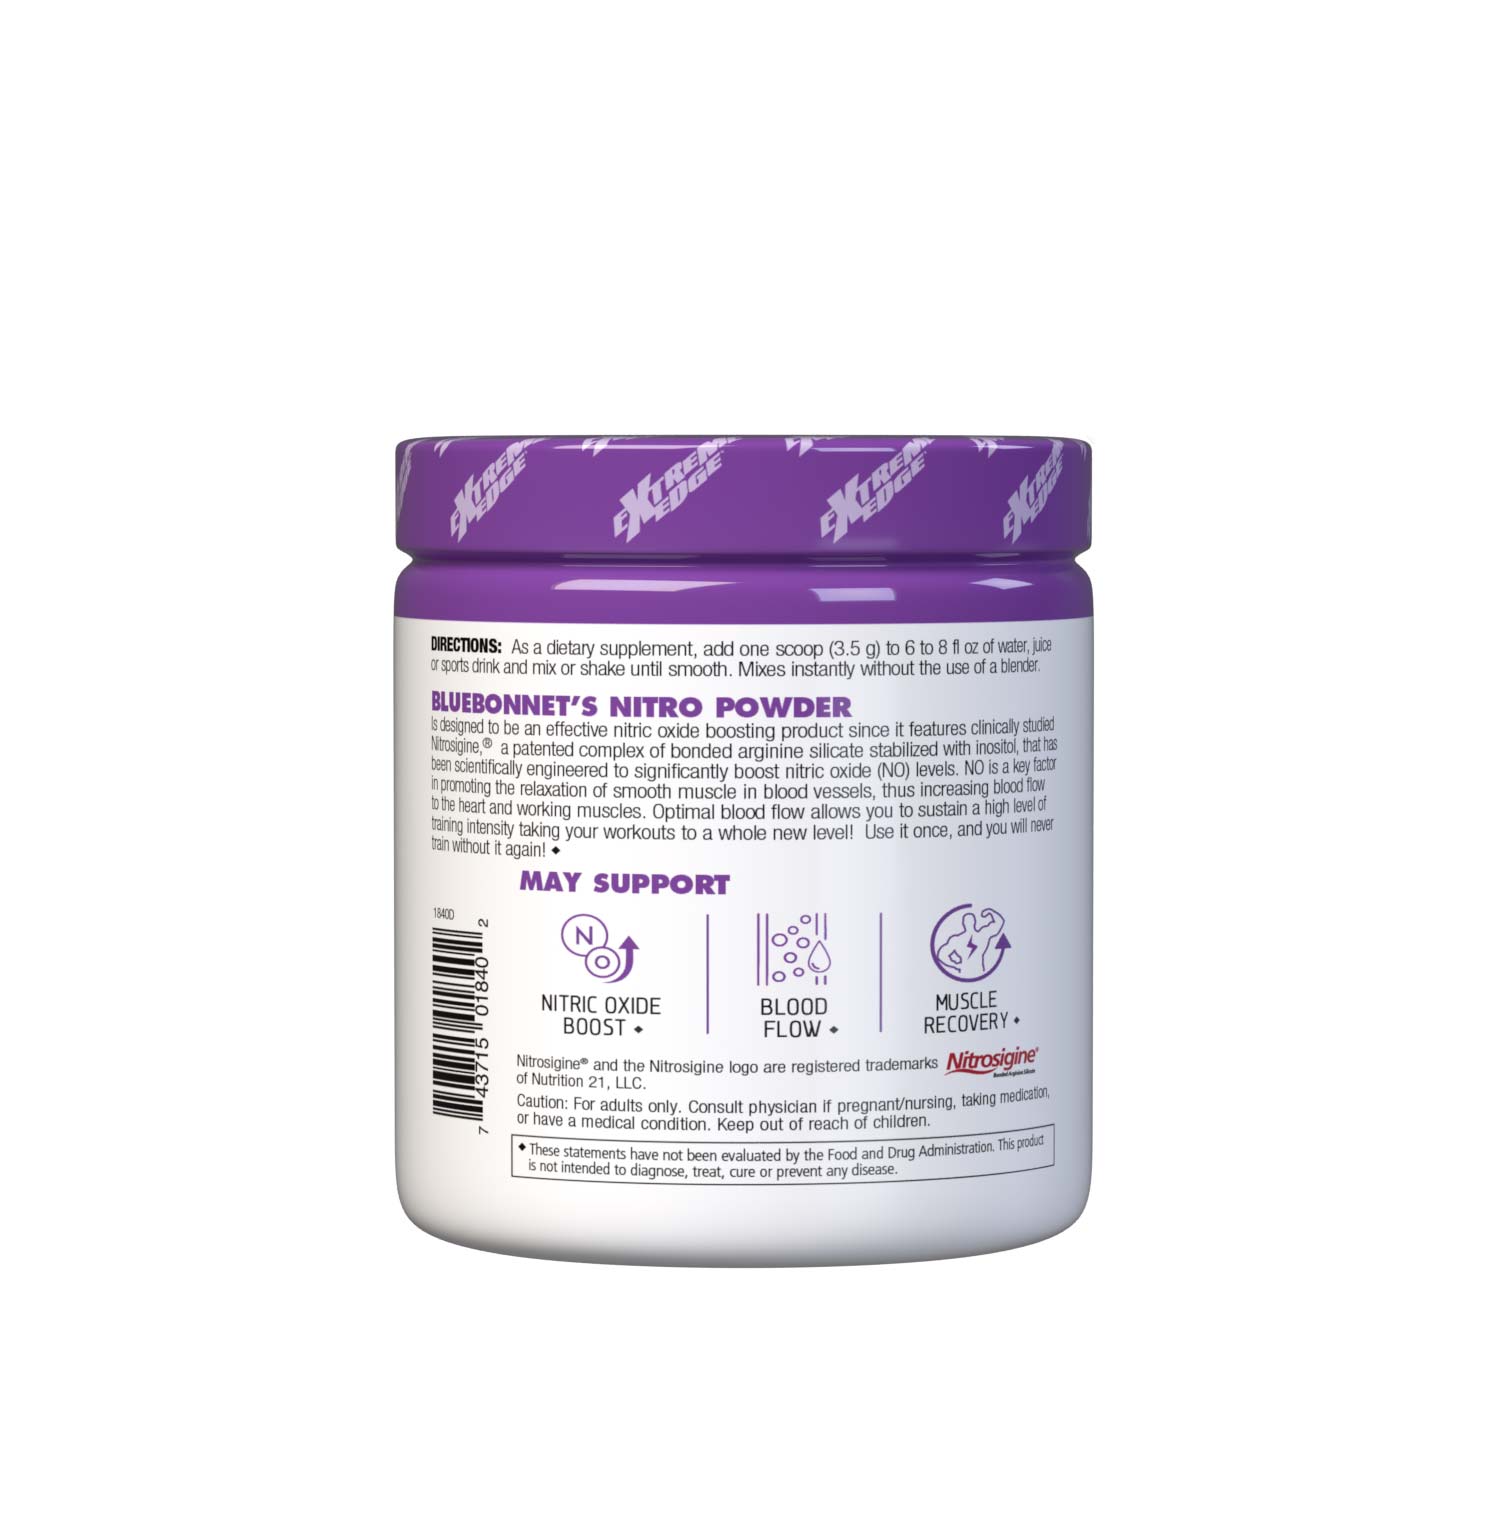 NITRO features clinically studied Nitrosigine, a patented complex of bonded arginine silicate stabilized with inositol, that has been scientifically engineered to significantly boost nitric oxide (NO) levels. NO is a key factor in promoting the relaxation of smooth muscle in blood vessels, thus increasing blood flow to the heart and working muscles. Optimal blood flow allows you to sustain a high level of training intensity. Description panel. #size_3.7 oz